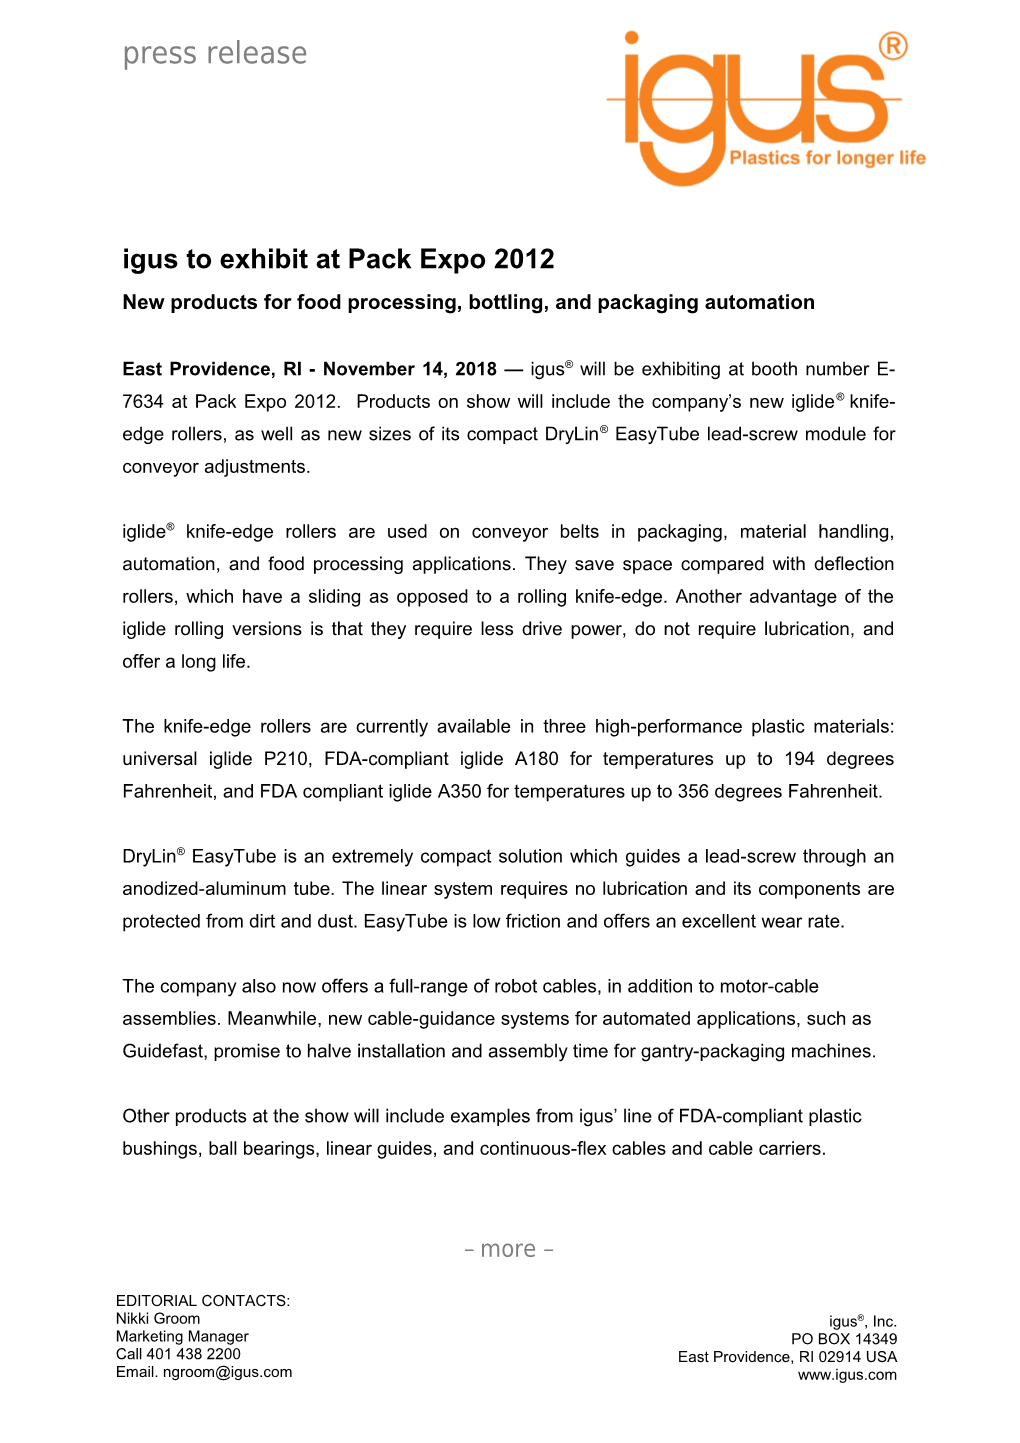 Igus to Exhibit at Pack Expo 2012